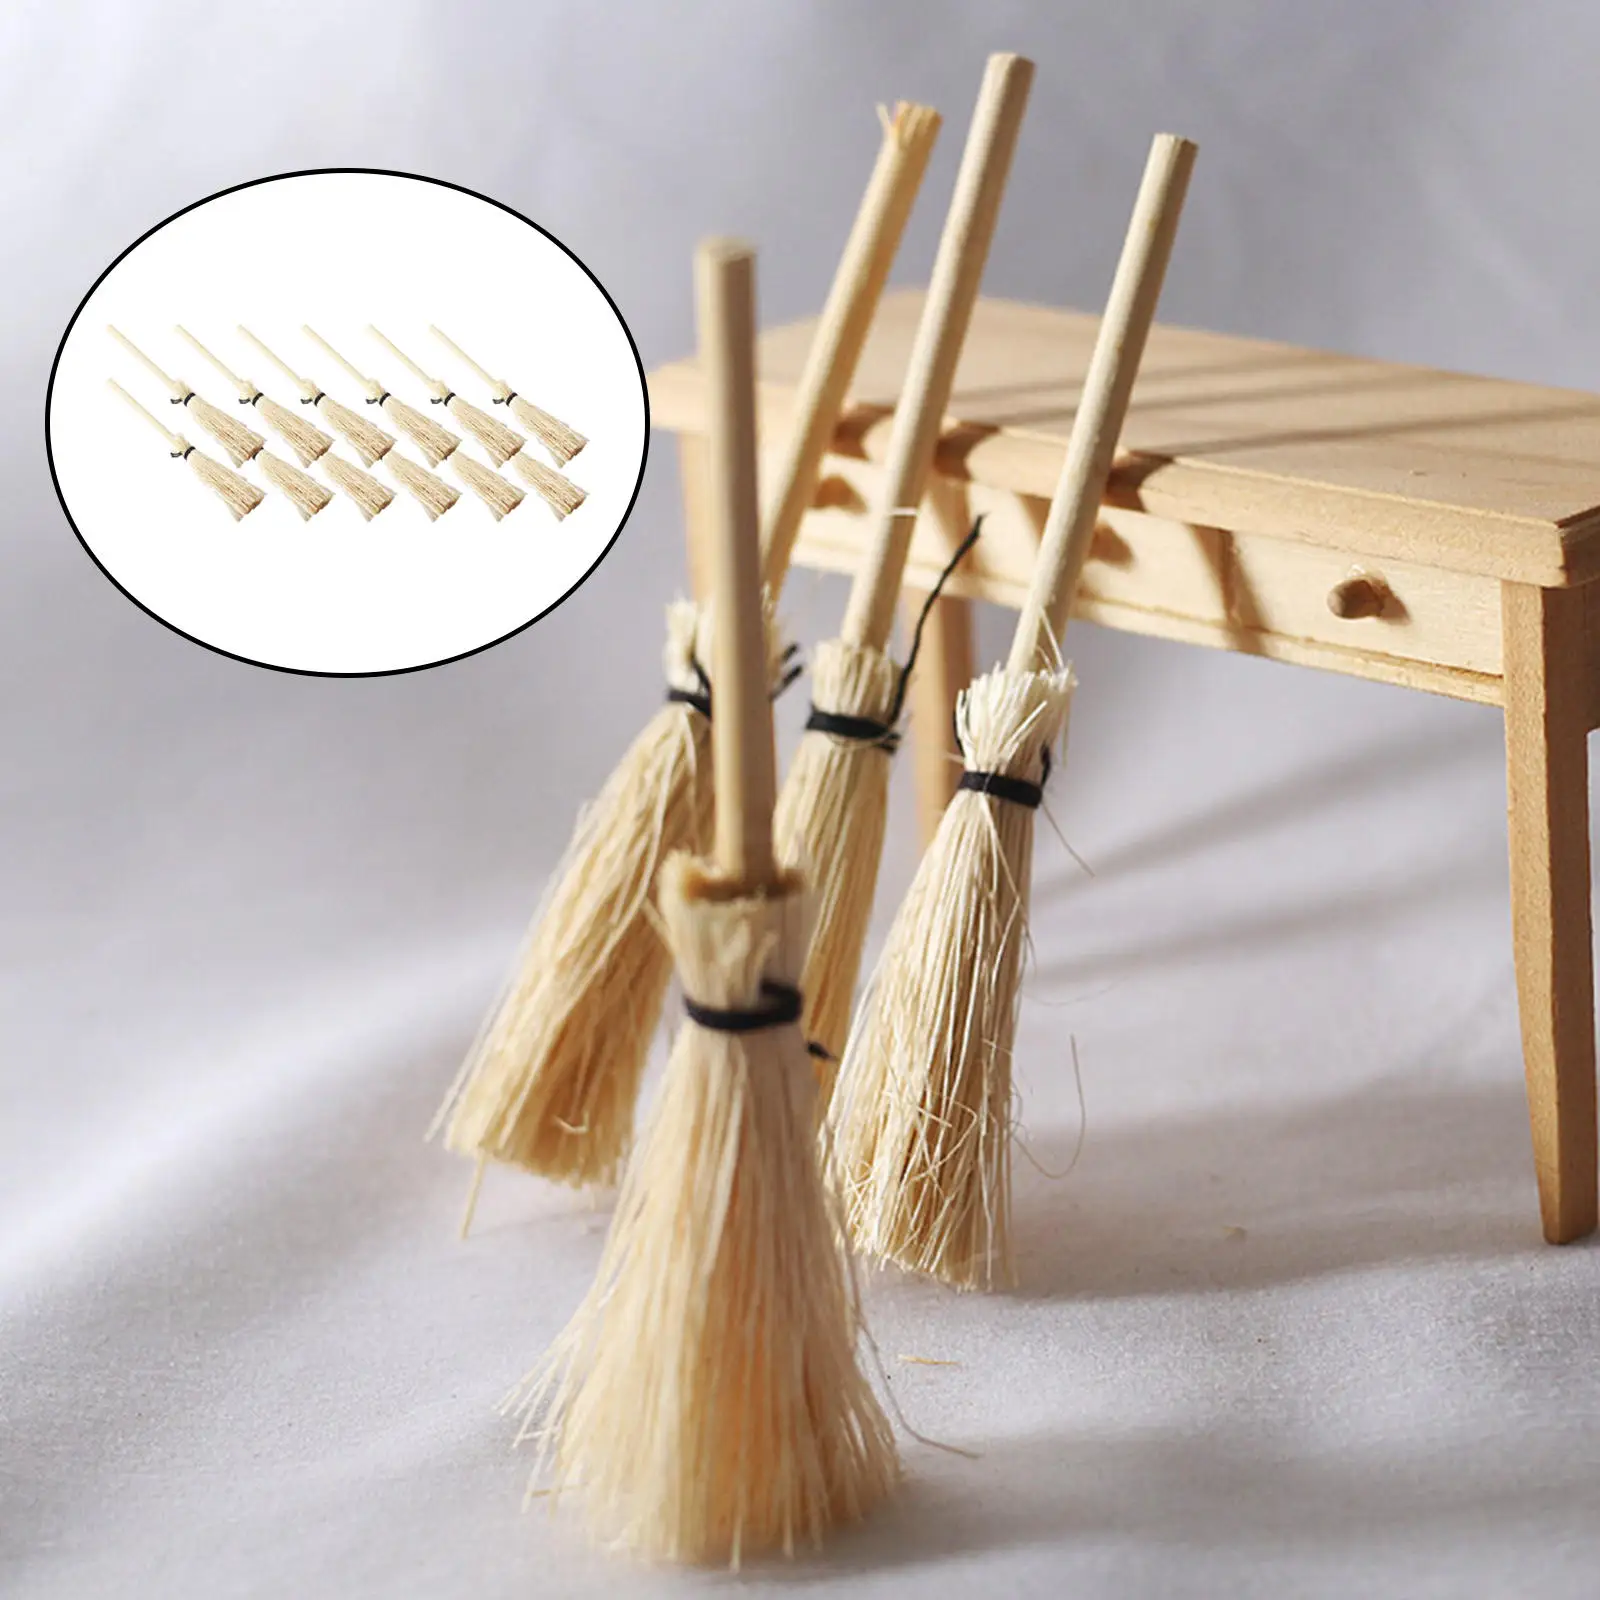 12 Pieces Dollhouse Miniature Broom Mini Broom DIY Crafts Playset for Dollhouse Costume Cosplay Party Decoration Accessories